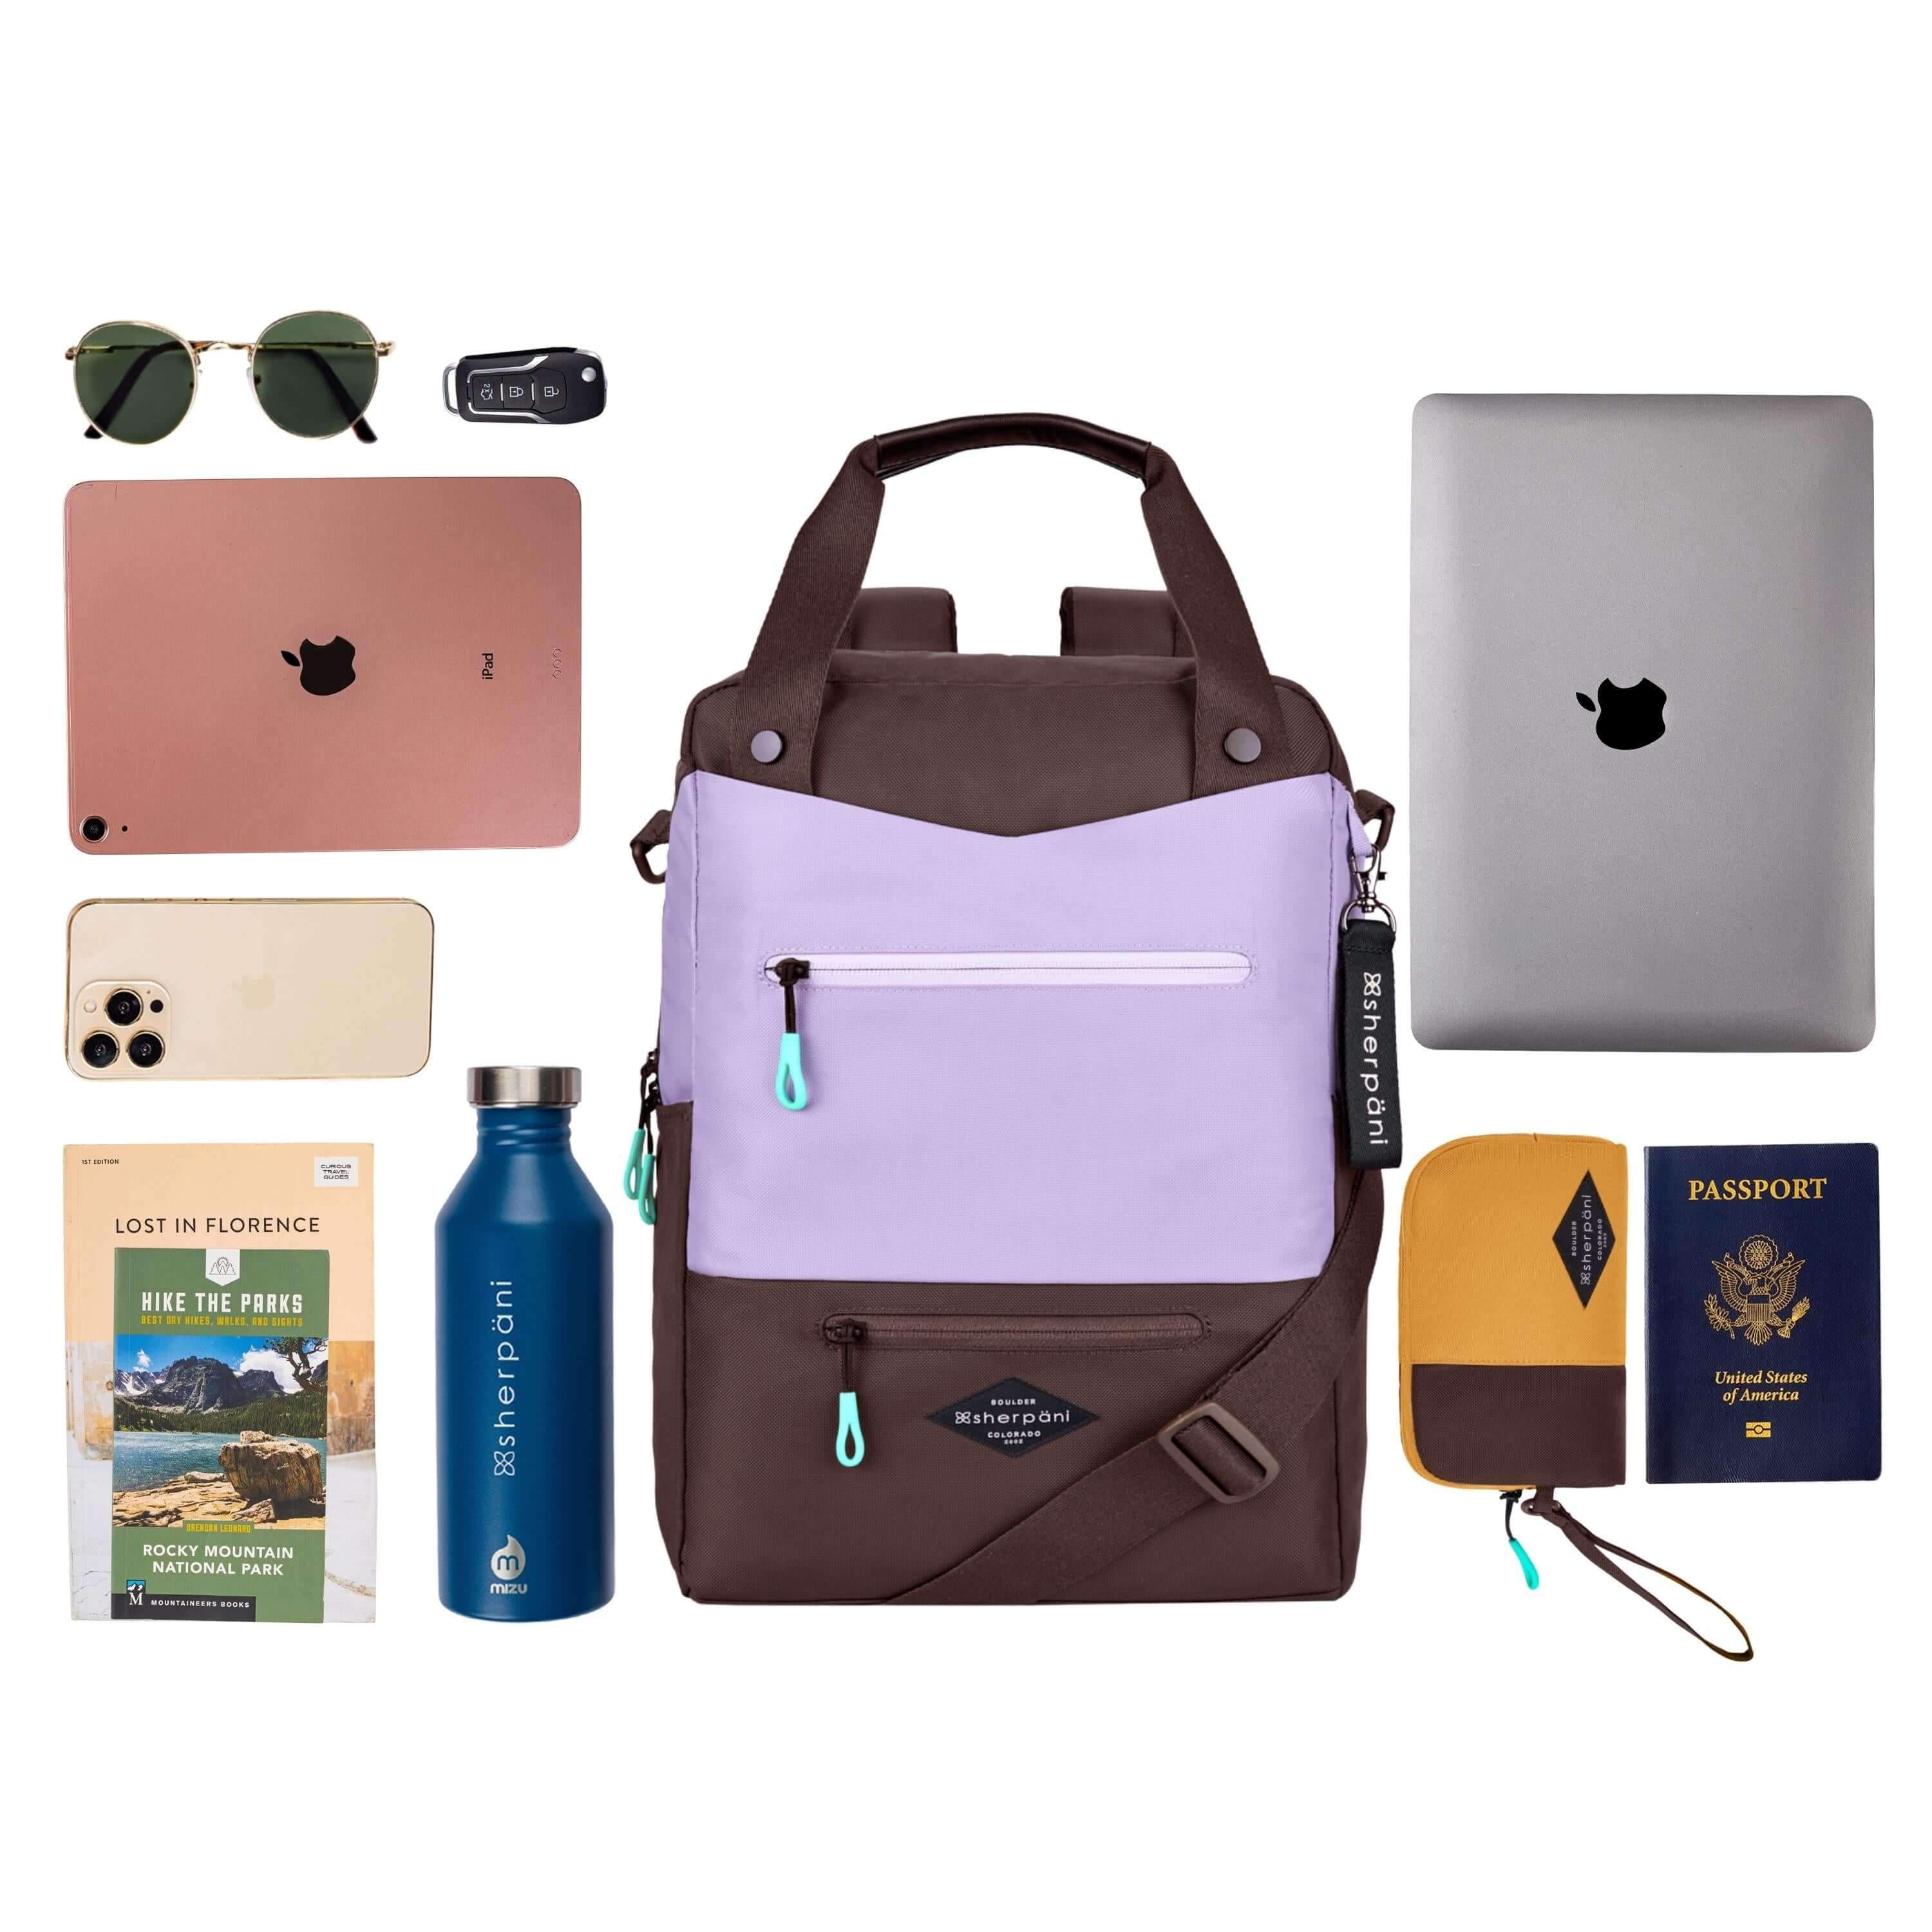 Top view of example items to fill the bag. Sherpani&#39;s three-in-one bag, the Camden in Lavender, lies in the center. It is surrounded by an assortment of items: sunglasses, car key, tablet, phone, travel books, water bottle, laptop, passport and Sherpani travel accessory the Jolie in Sundial.